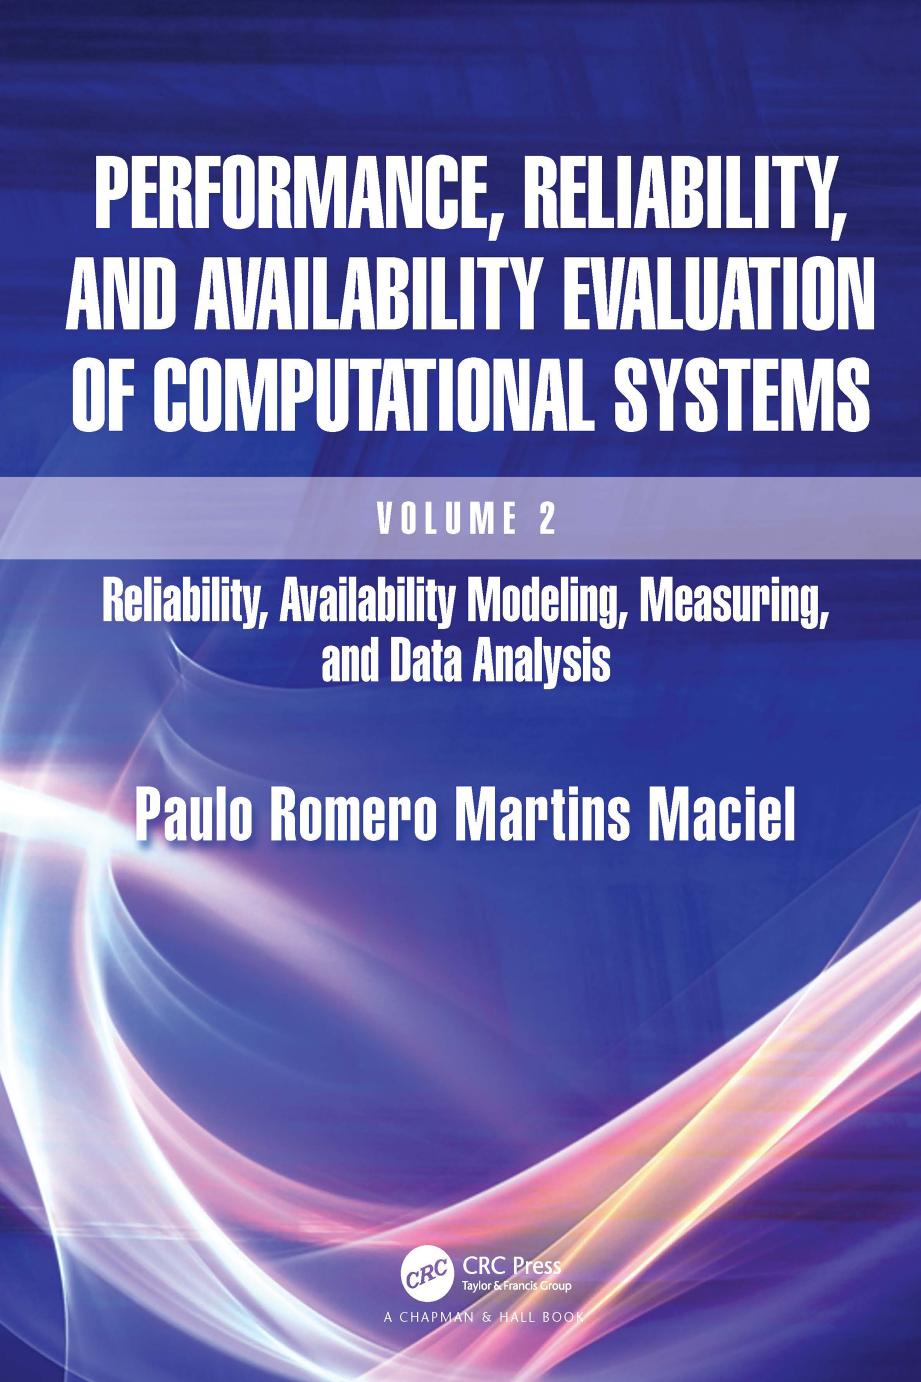 Performance, Reliability, and Availability Evaluation of Computational Systems, Volume II: Reliability, Availability Modeling, Measuring, and Data Analysis by Paulo Romero & Martins Maciel